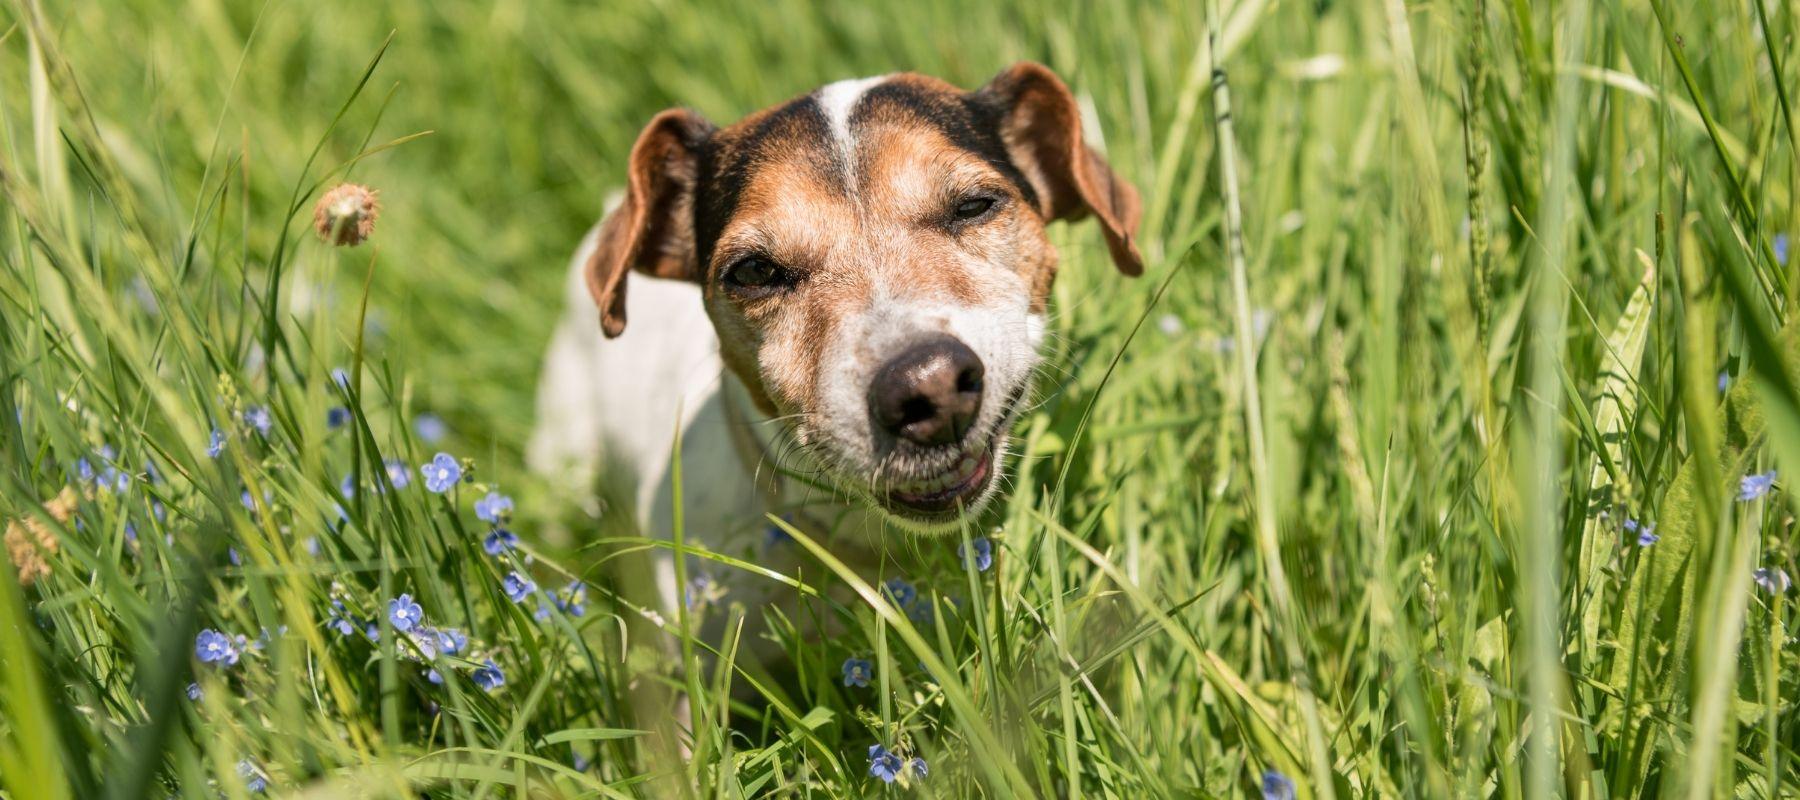 Why Do Dogs Eat Grass? - Calming Dog